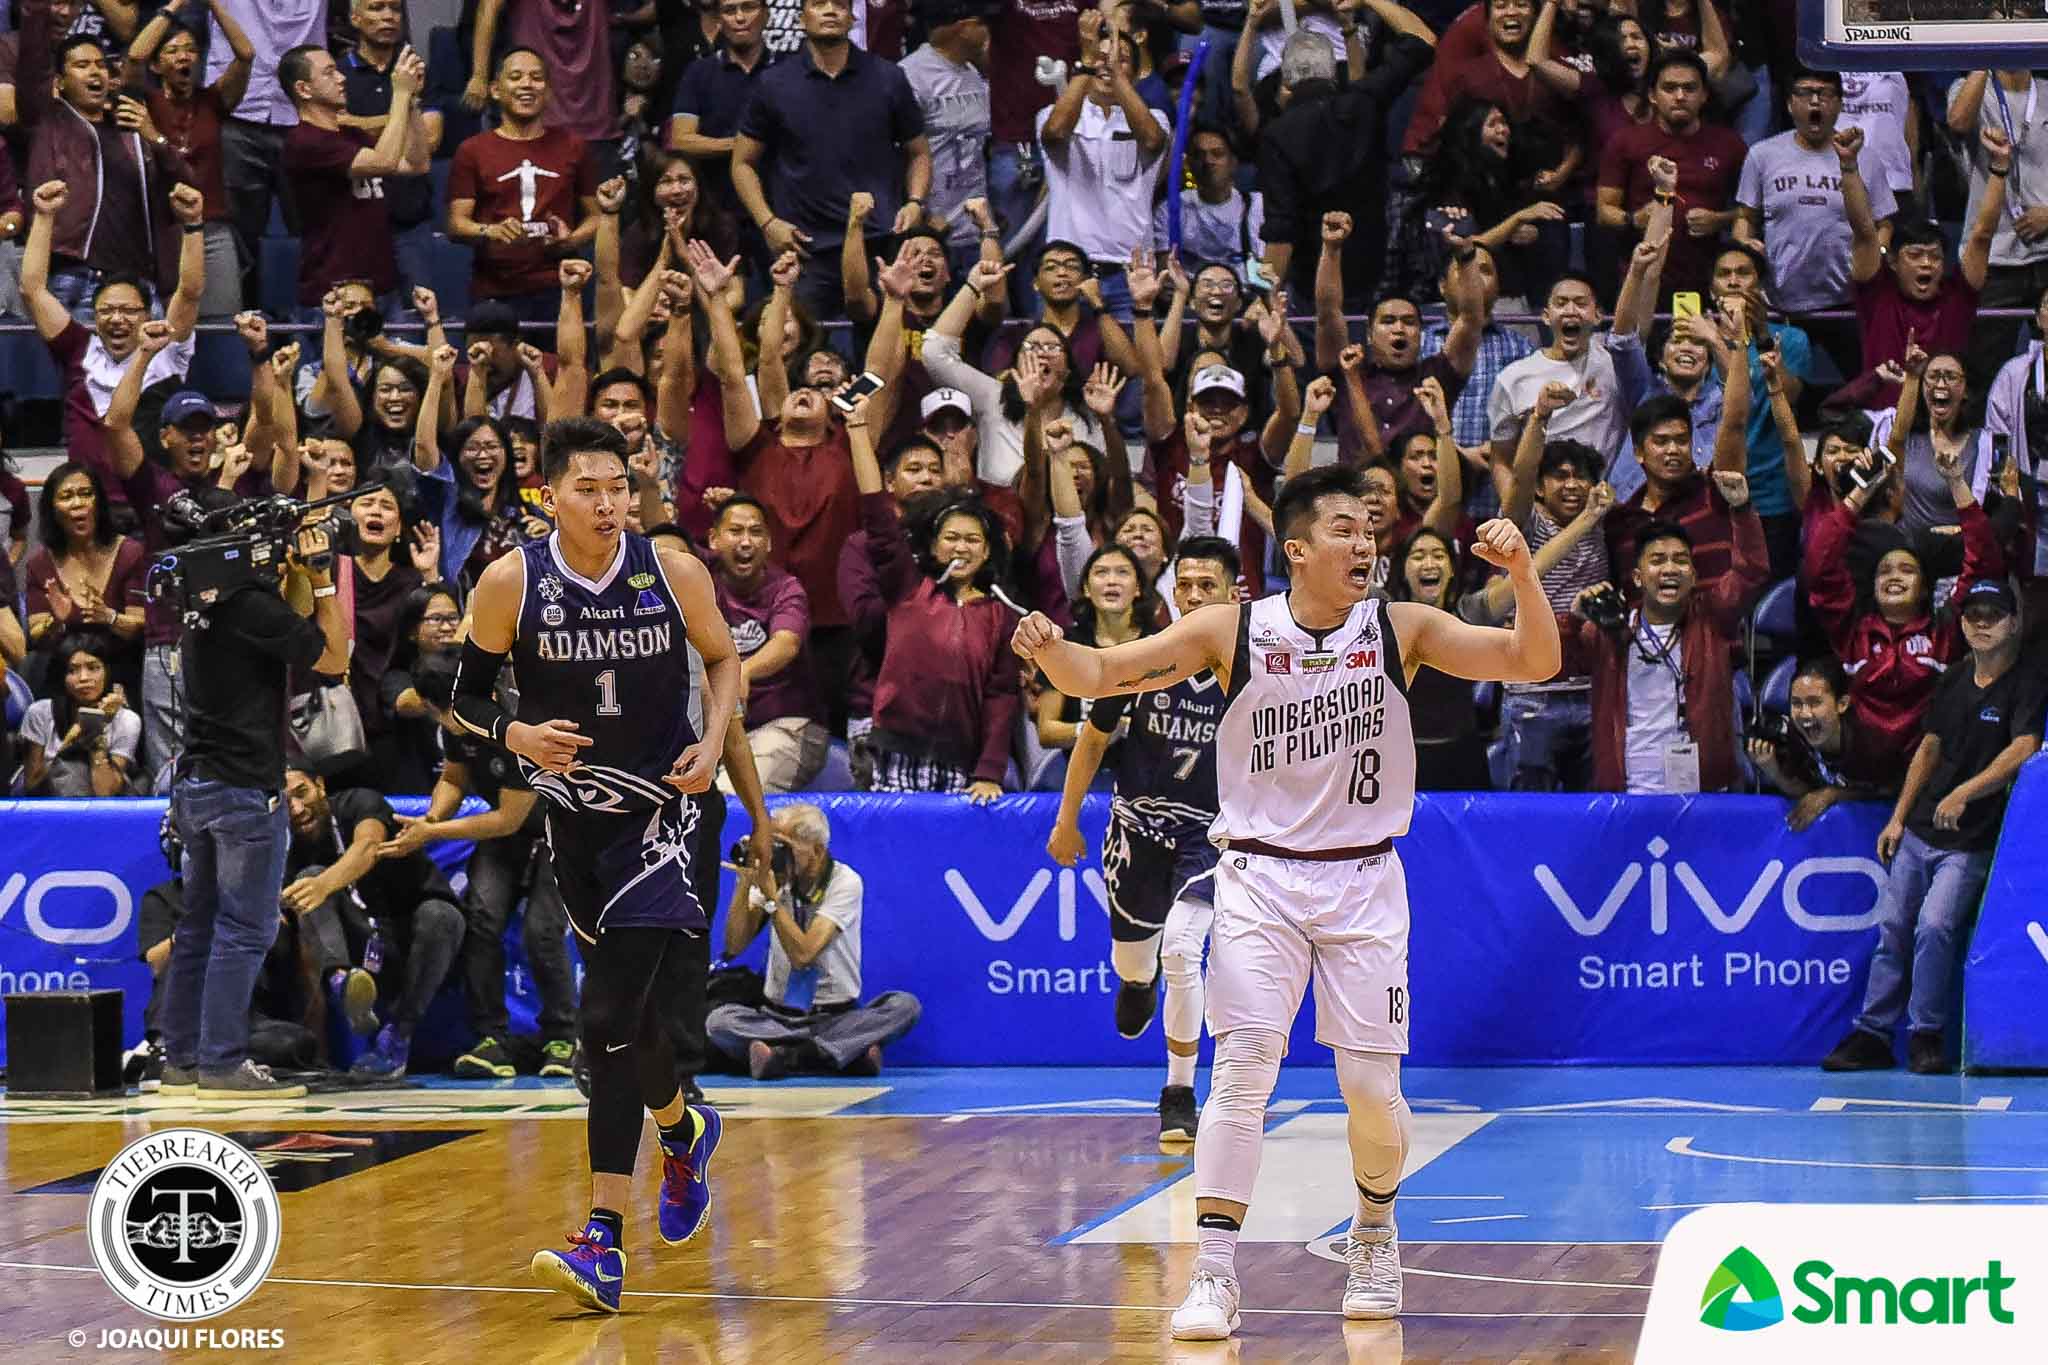 UAAP-81-Final-Four-ADU-vs.-UP-Desiderio-9906 Nothing personal as Paul Desiderio sinks game-winner over Sean Manganti Basketball News UAAP UP  - philippine sports news